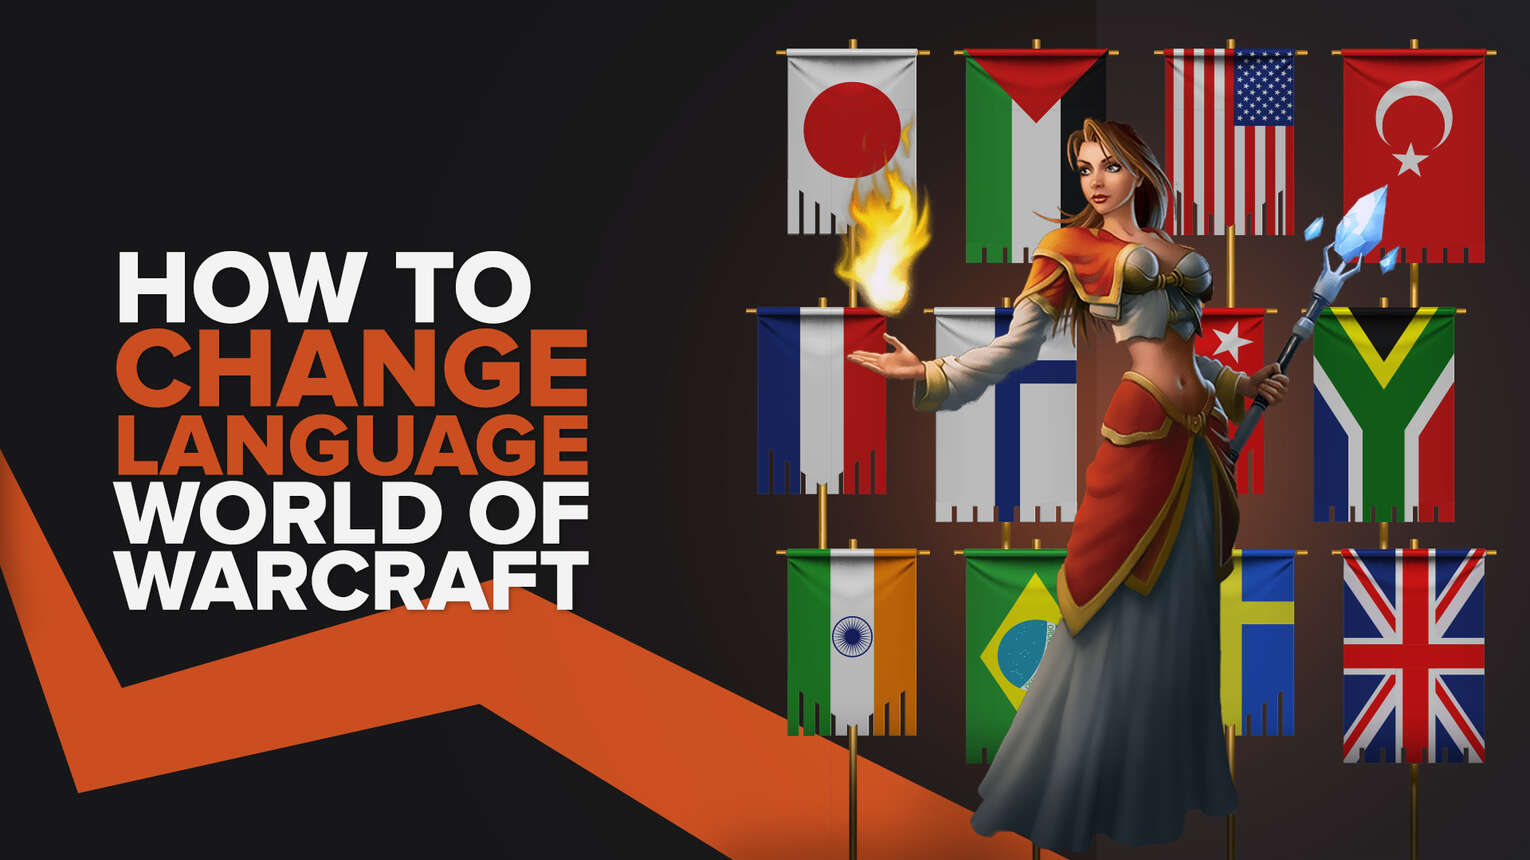 How To Change Language in World of Warcraft Easily